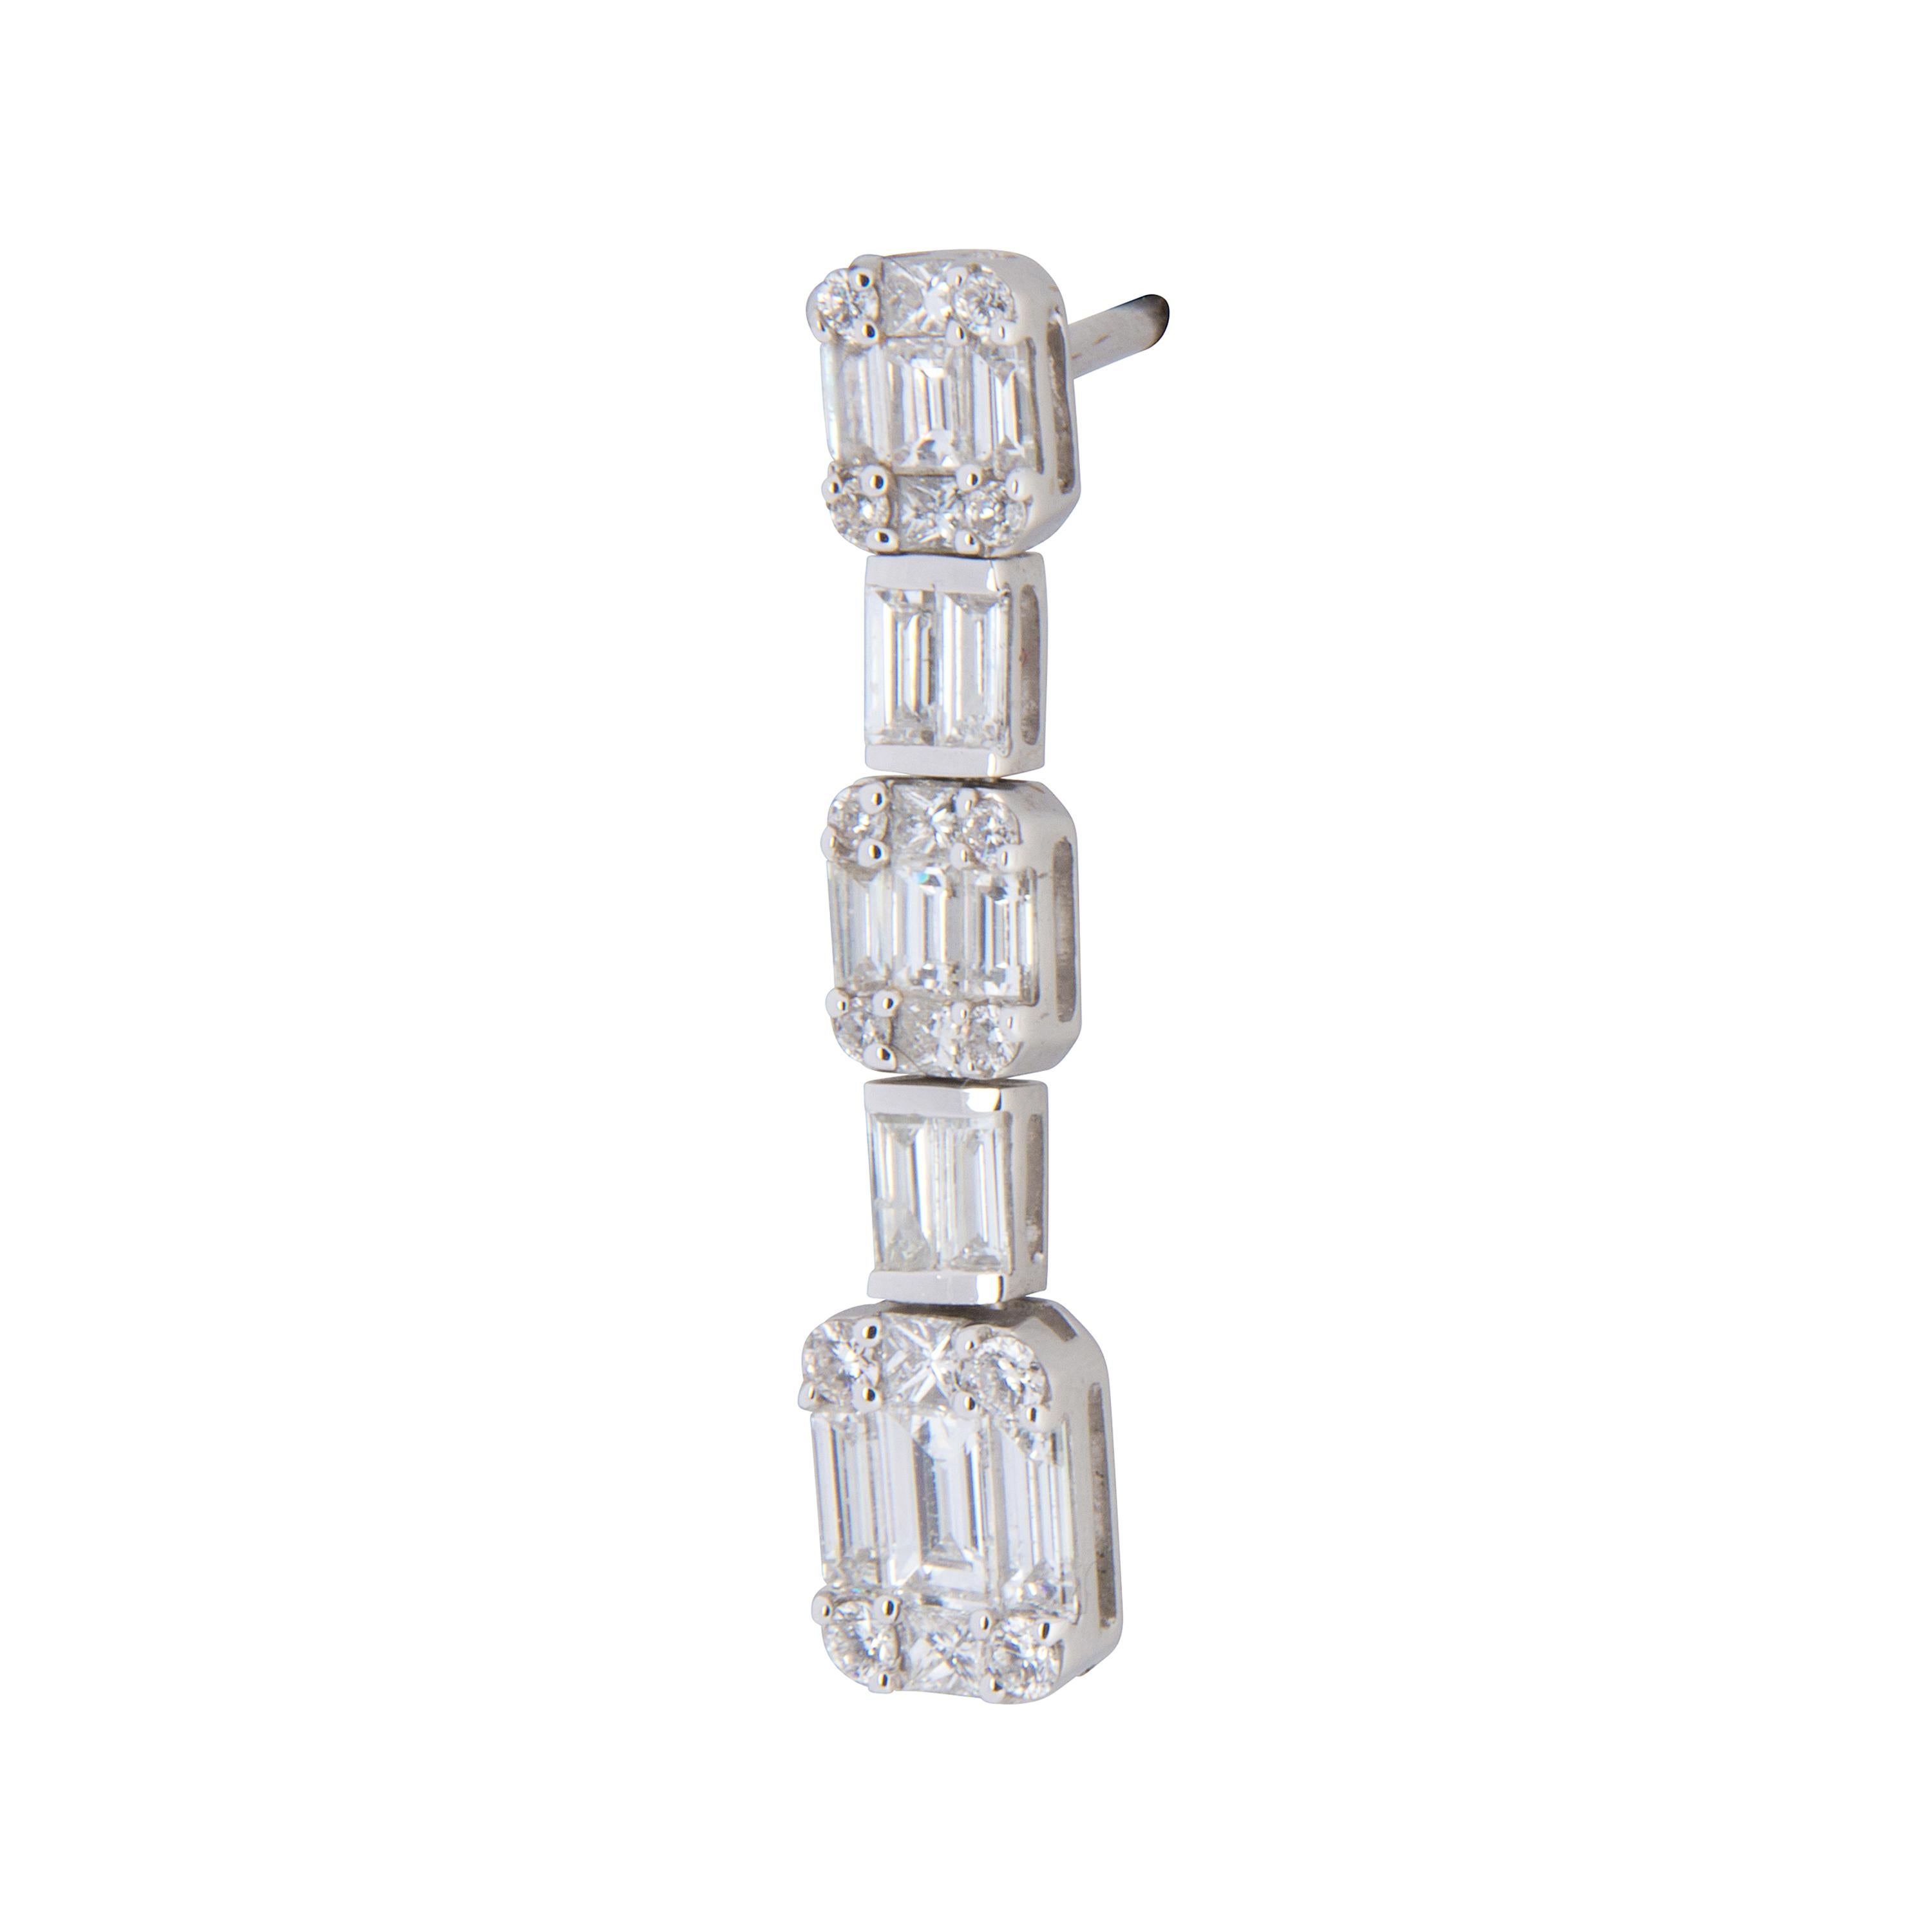 18 karat white gold 5-link drop earrings featuring baguette and round brilliant cut diamonds totalling 2.04ct.